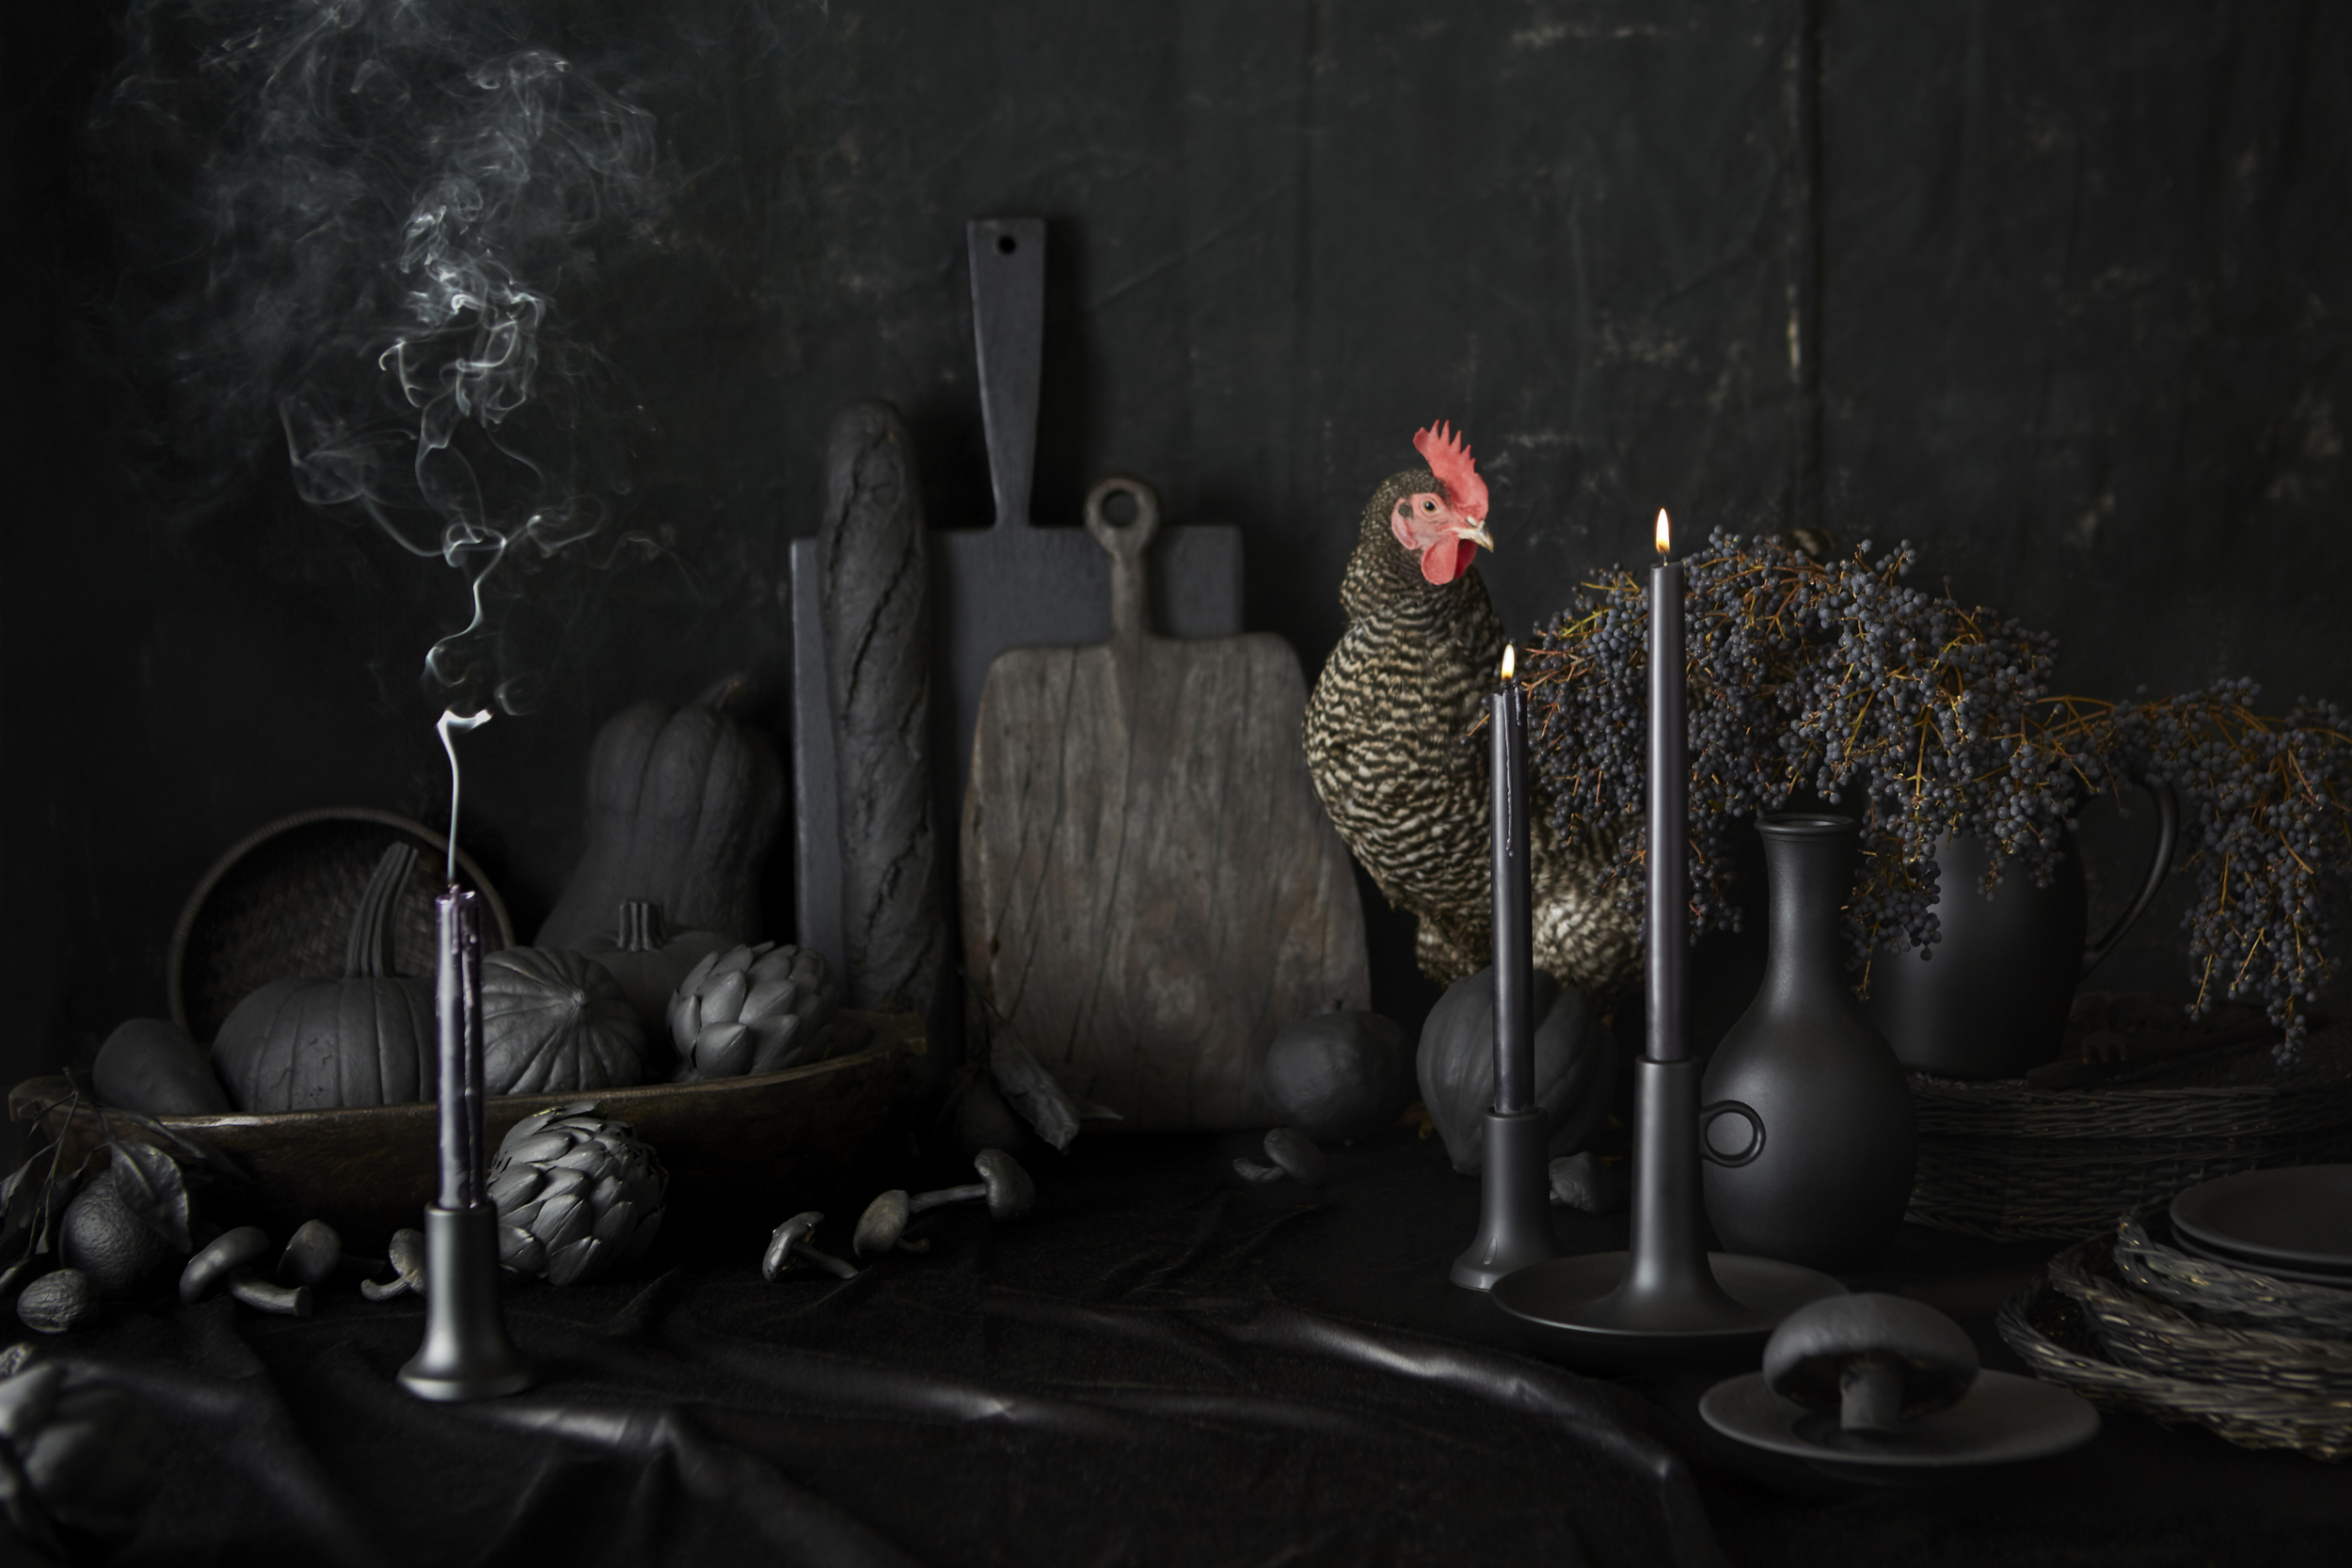  Art Direction and Prop Styling: Bryson Gill  Photography: Liz Daly 